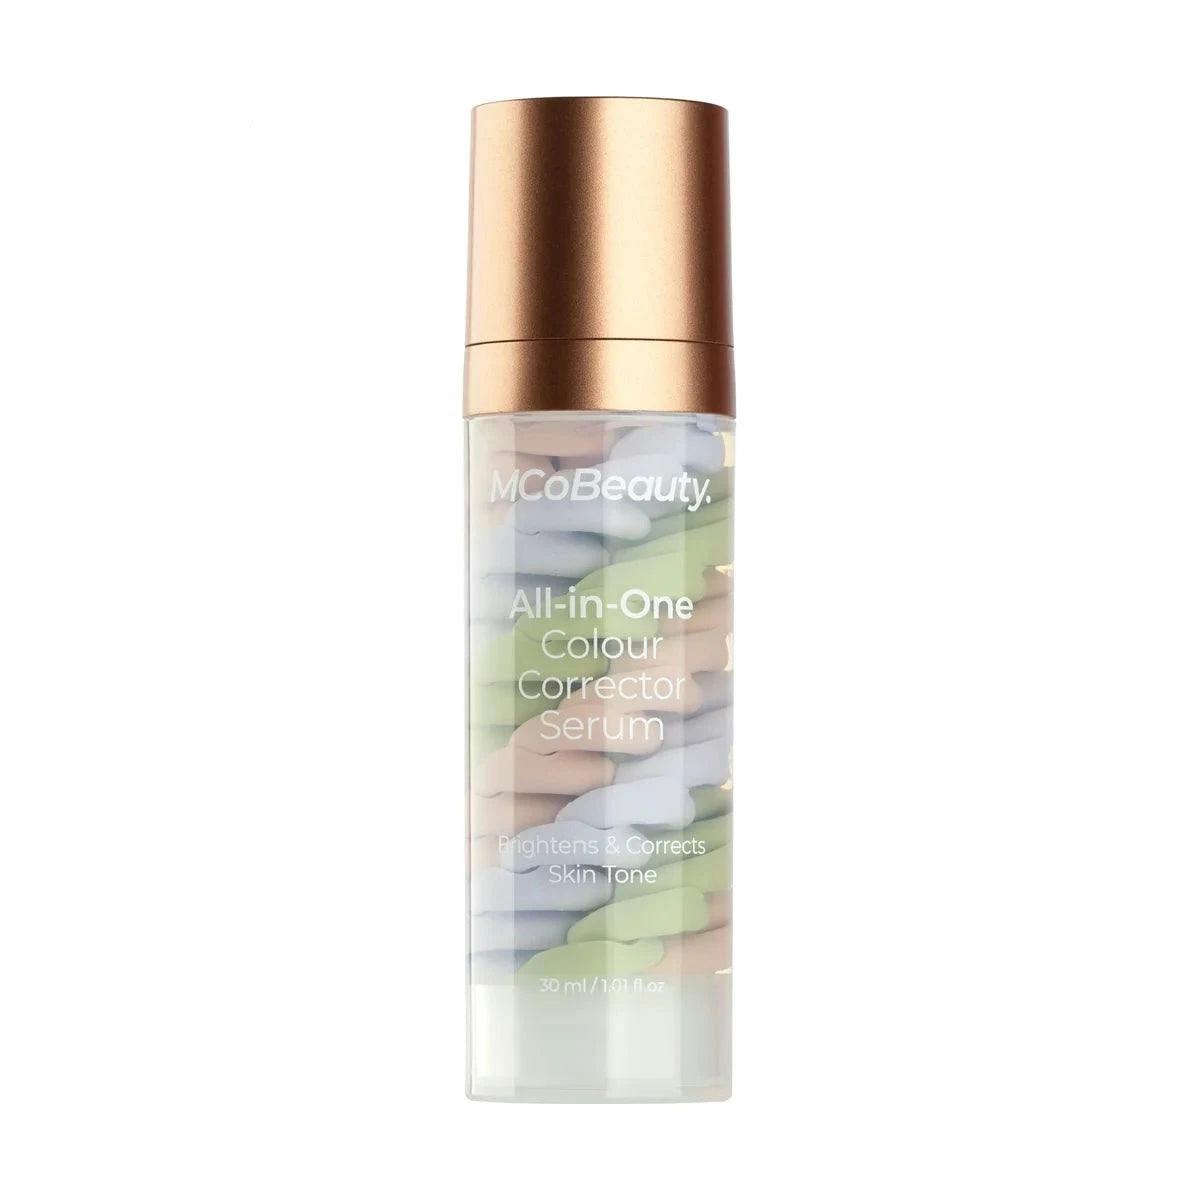 MCoBeauty All-In-One Colour Correcting Primer 30ml